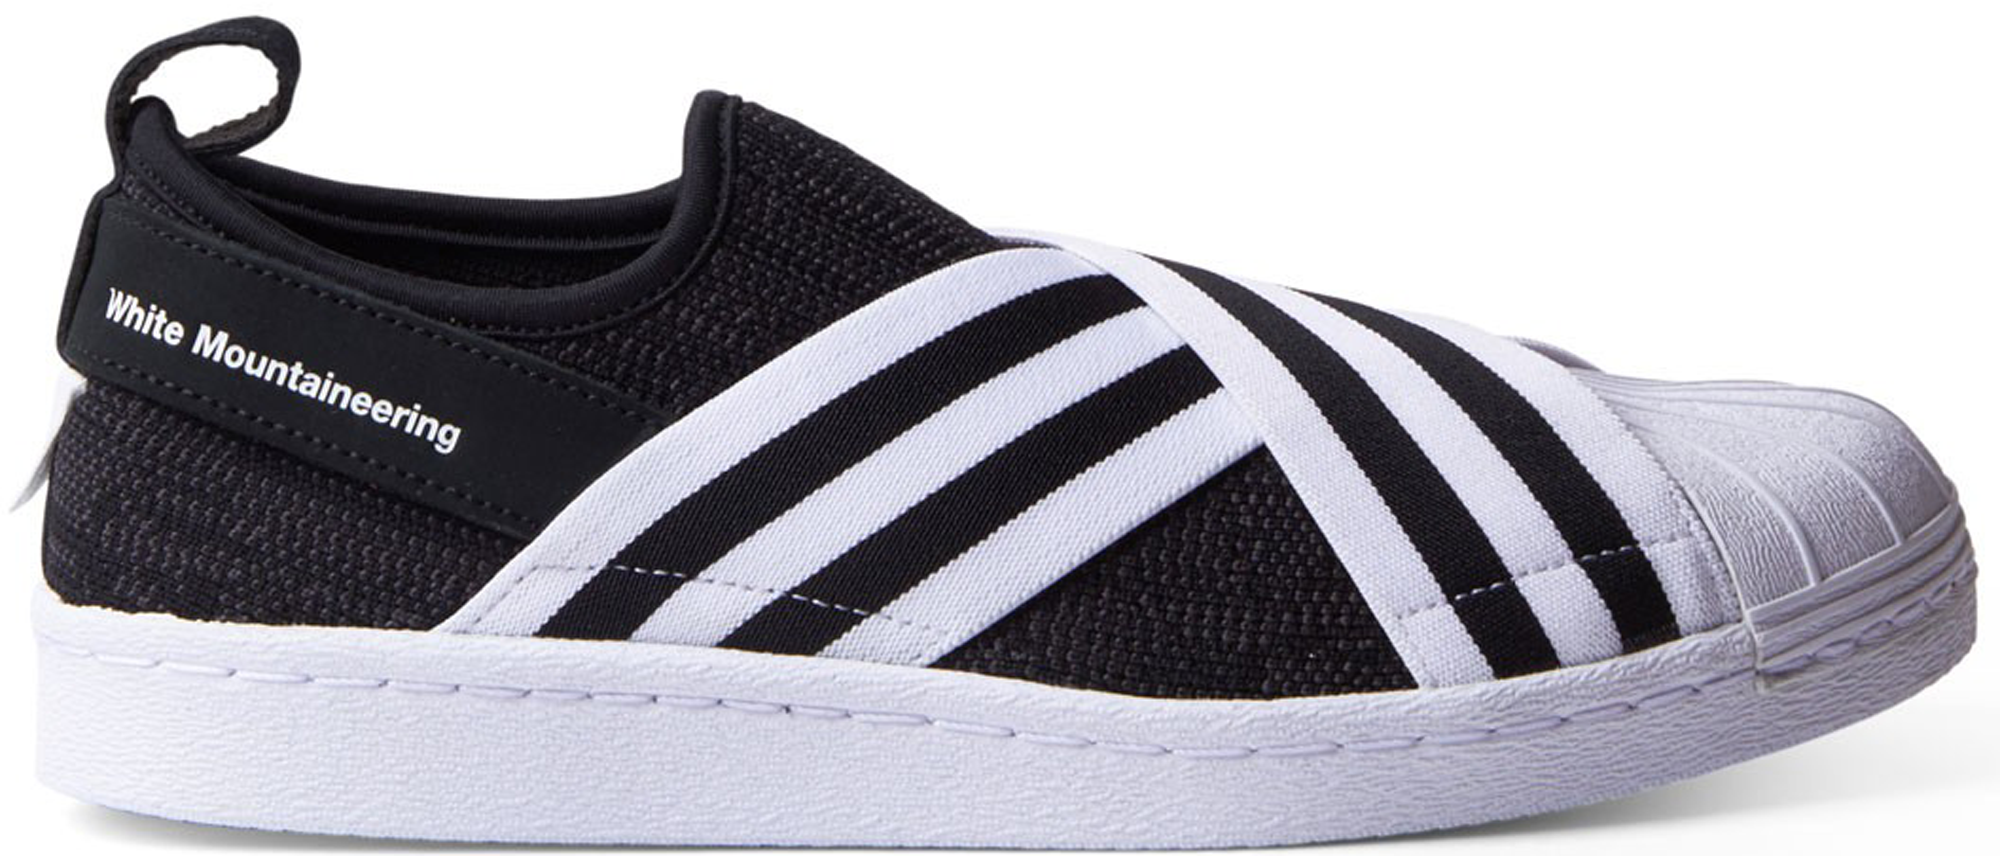 adidas Superstar Slip-On White Mountaineering Black - BY2880